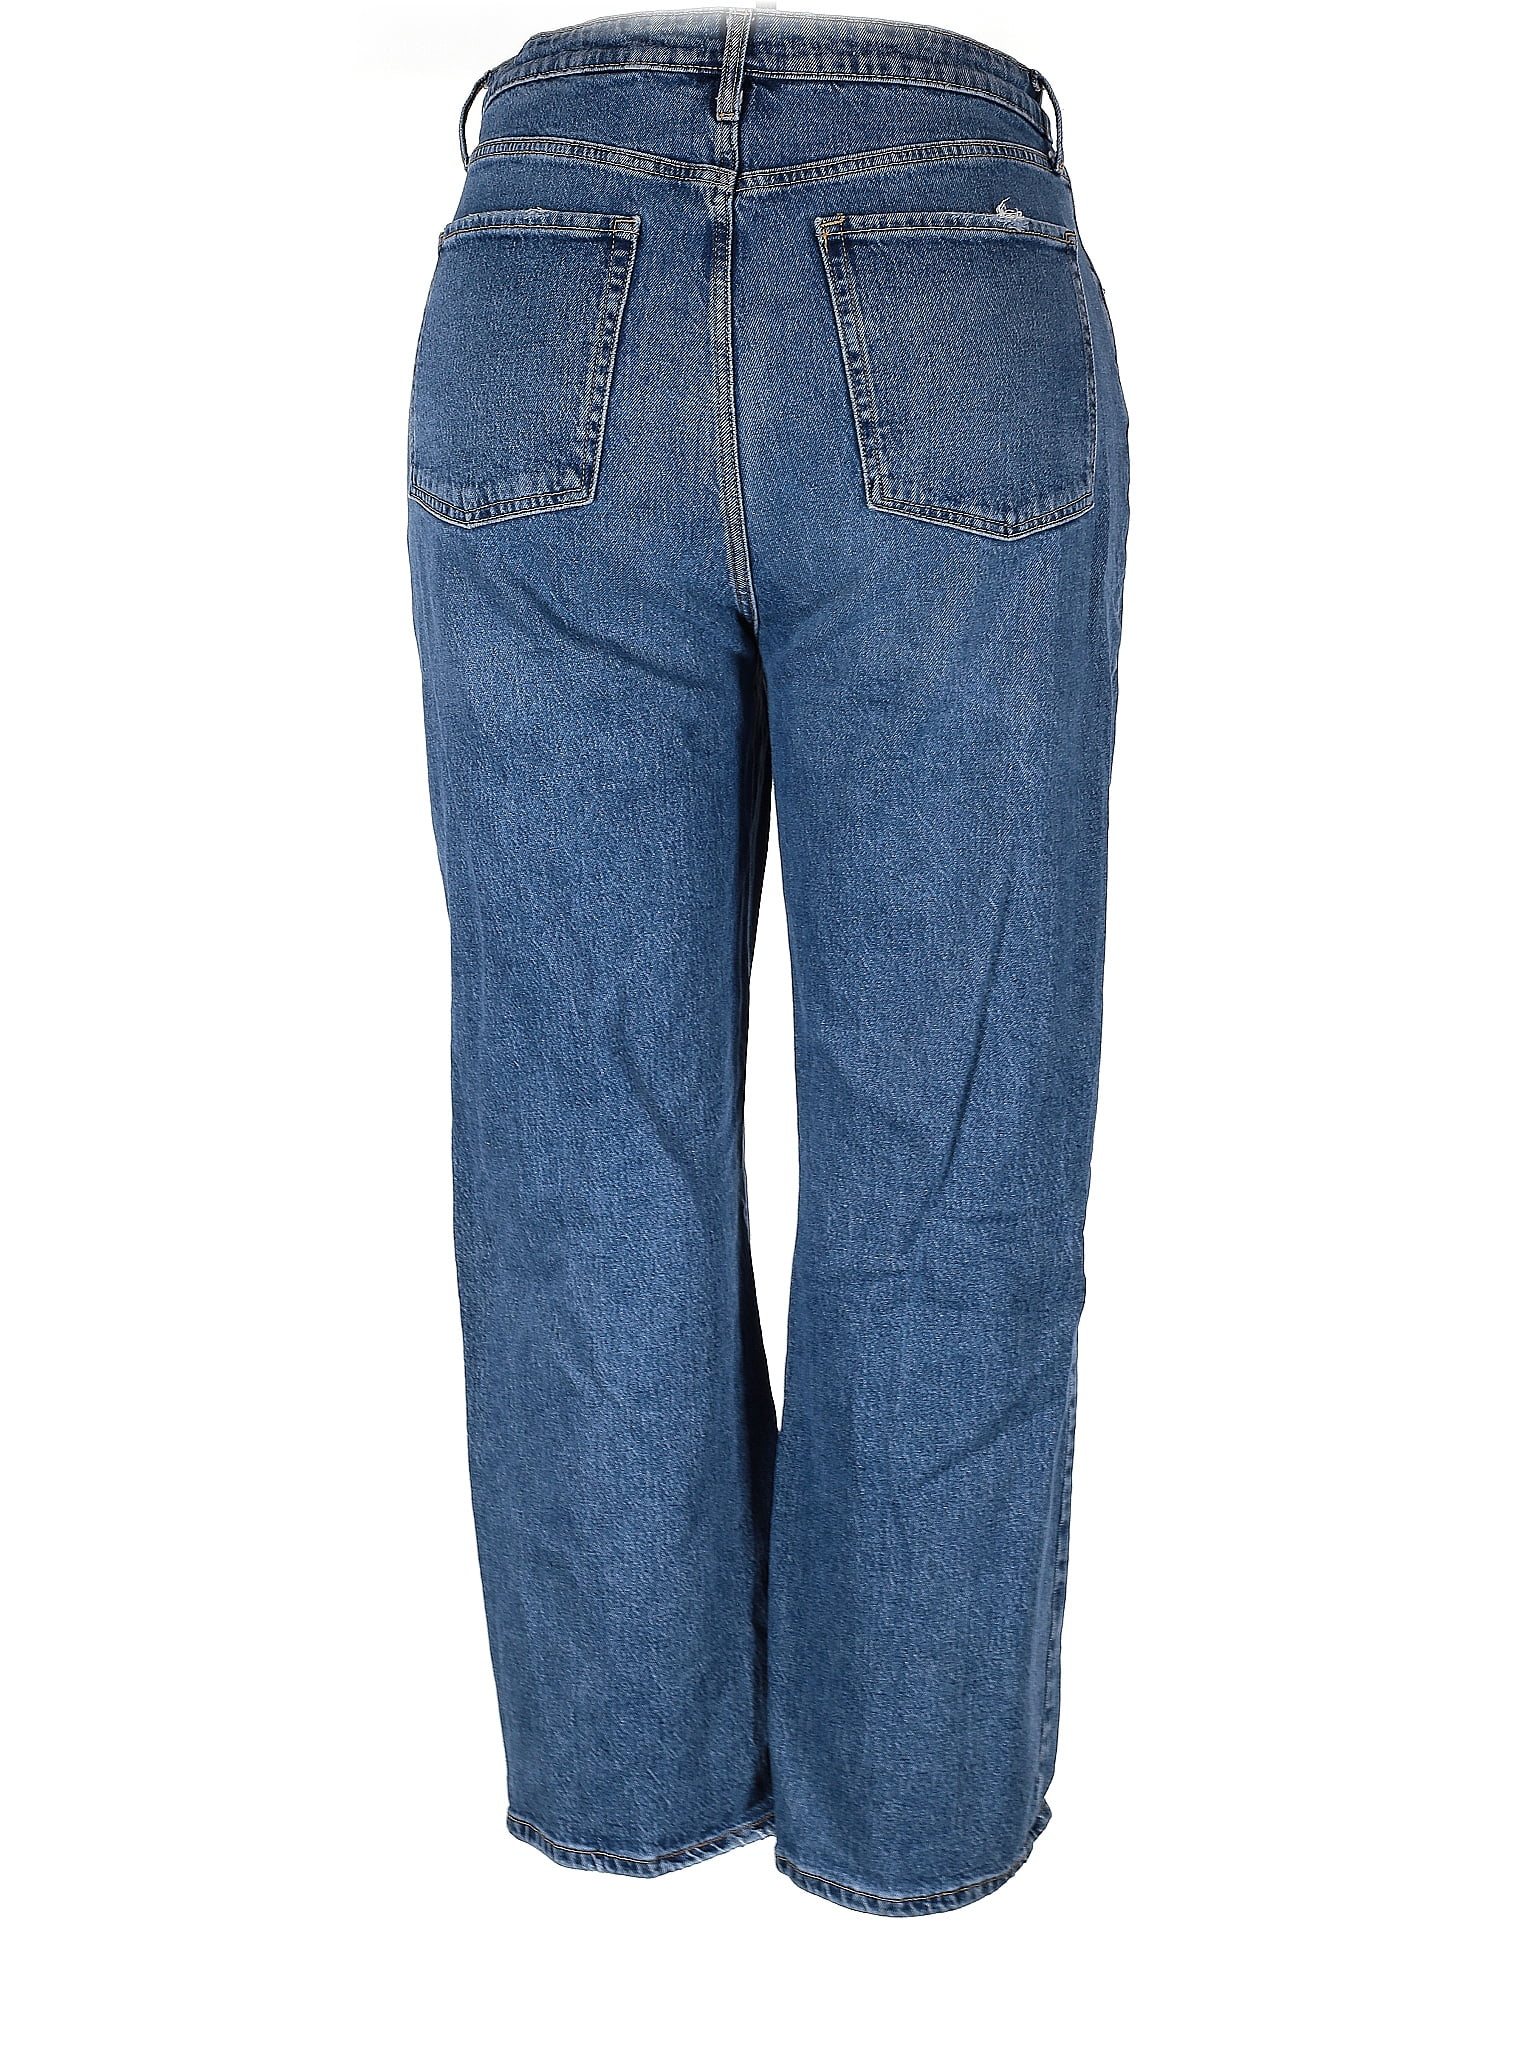 Wild Fable Solid Blue Jeans Size 18 (Plus) - 28% off